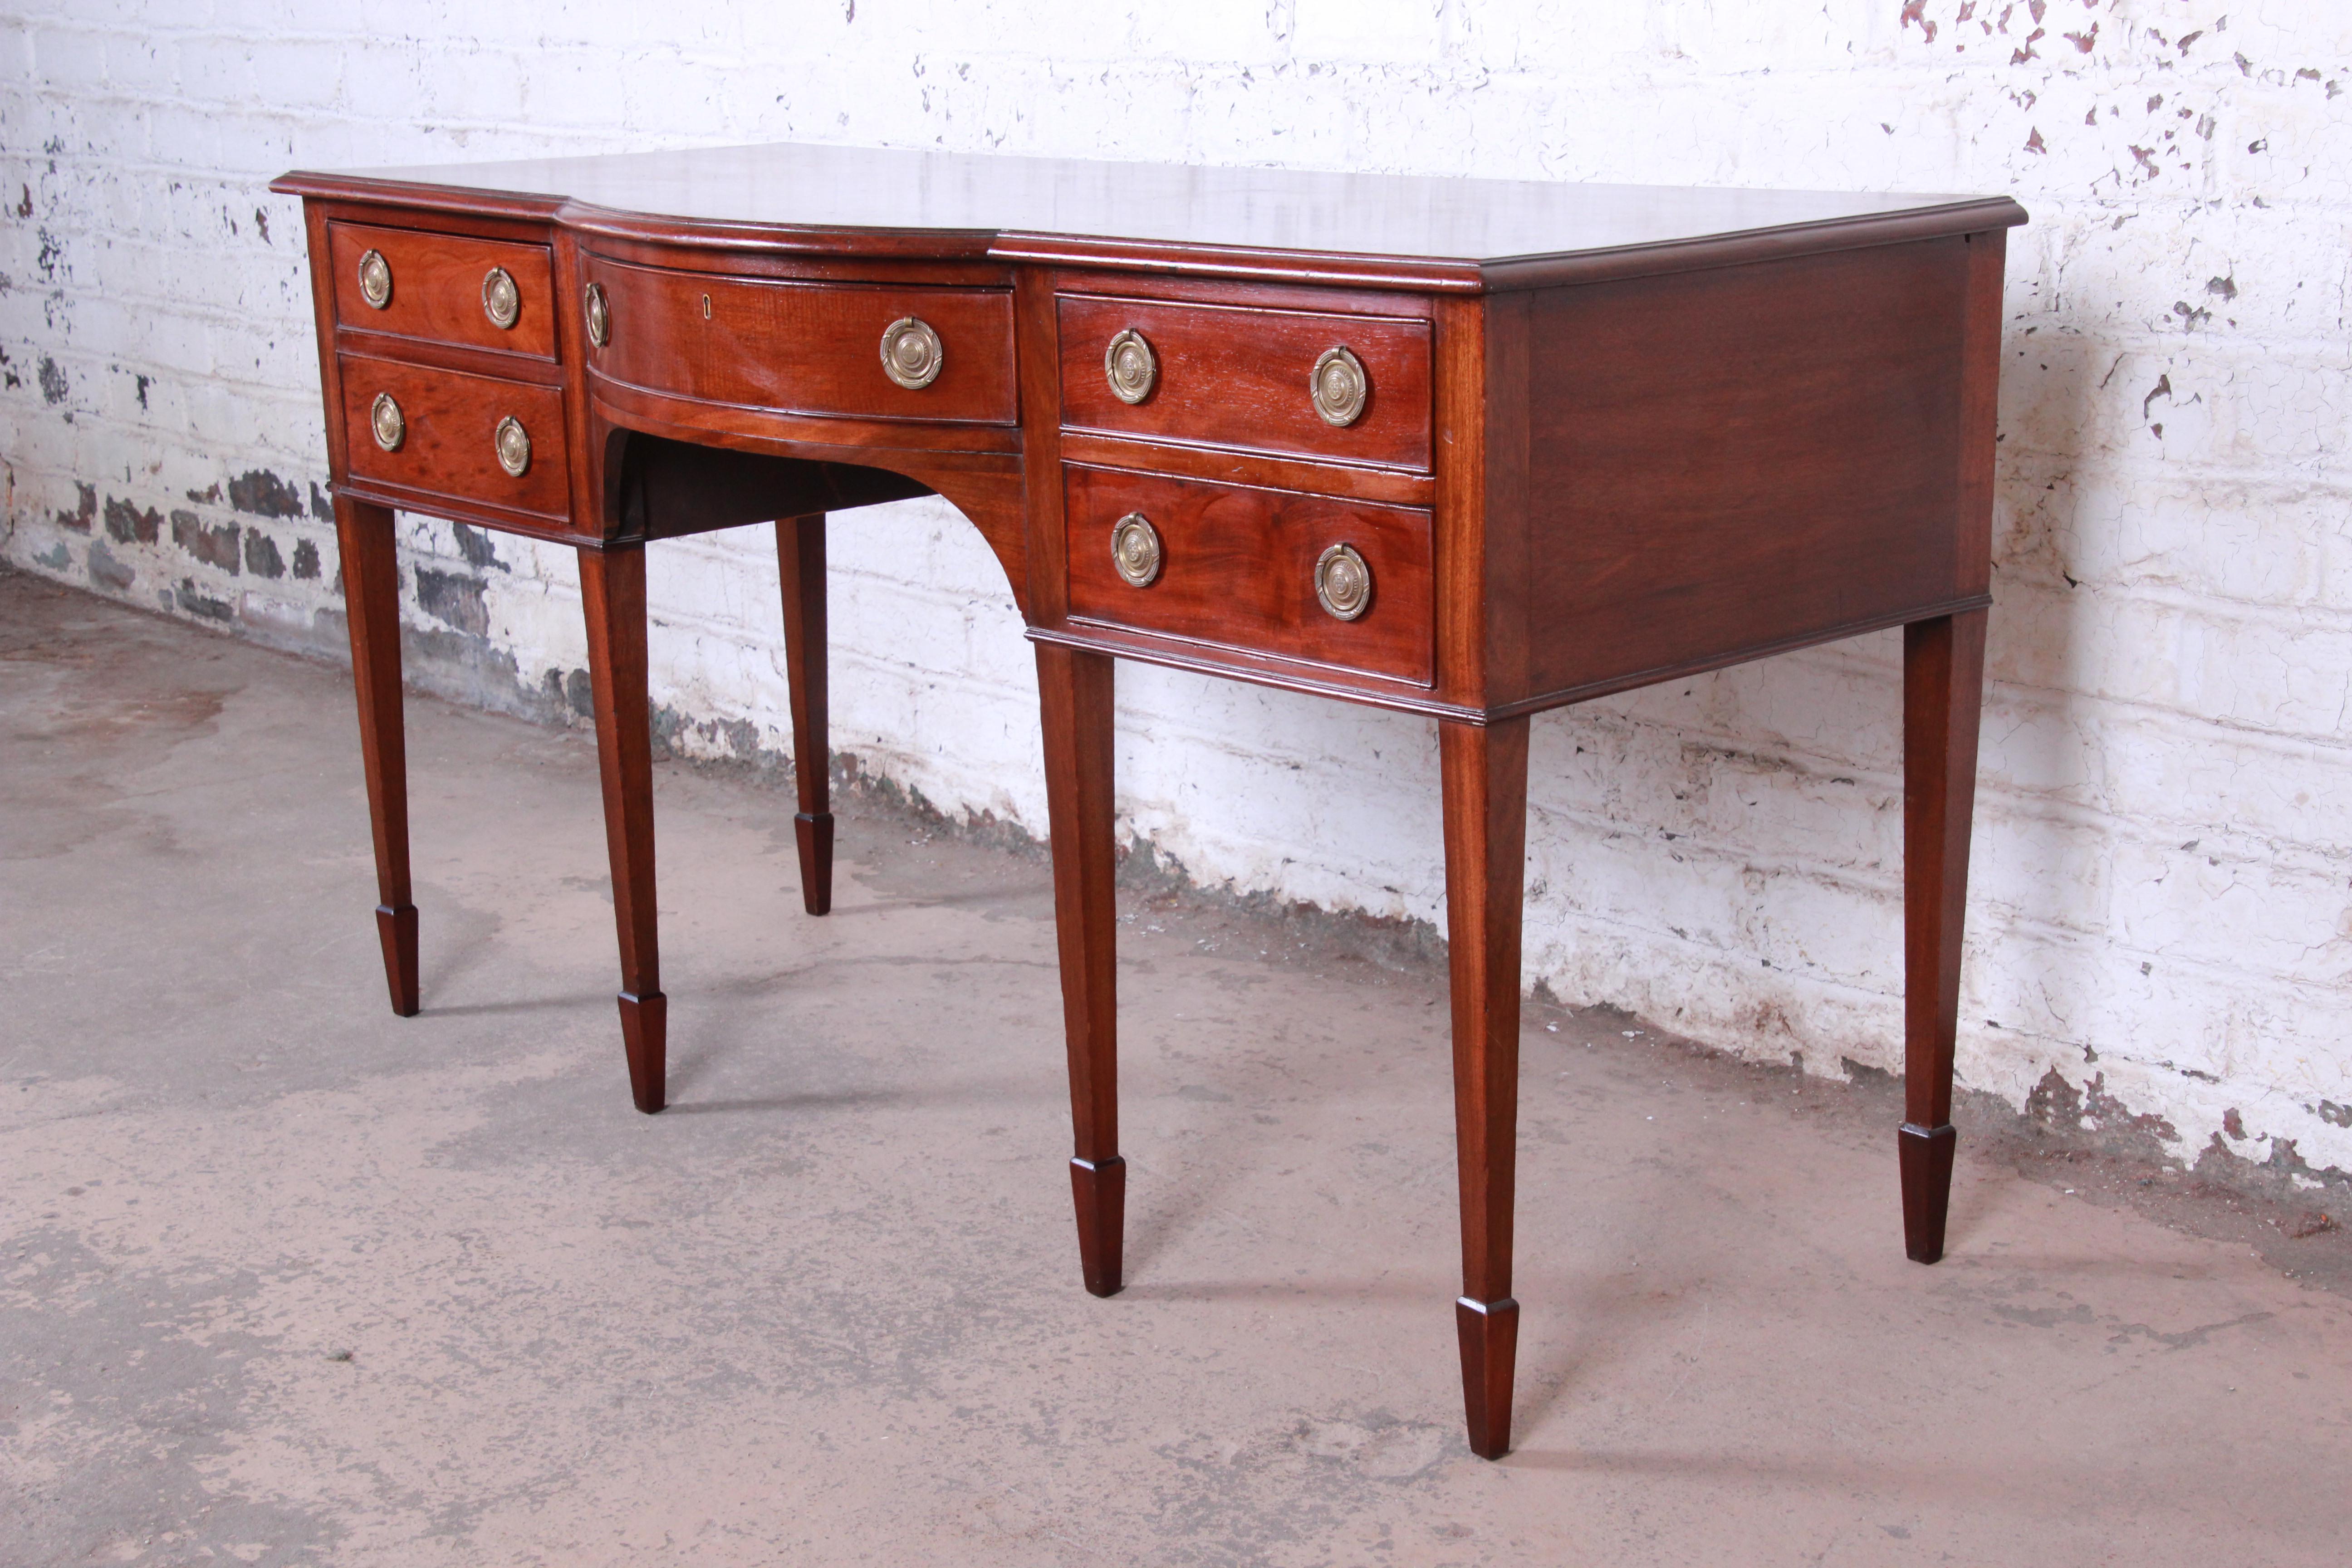 A gorgeous antique Hepplewhite style mahogany sideboard or buffet server. The sideboard features beautiful mahogany wood grain and original brass hardware. It offers good storage, with five dovetailed drawers. The case rests on tall legs with spade